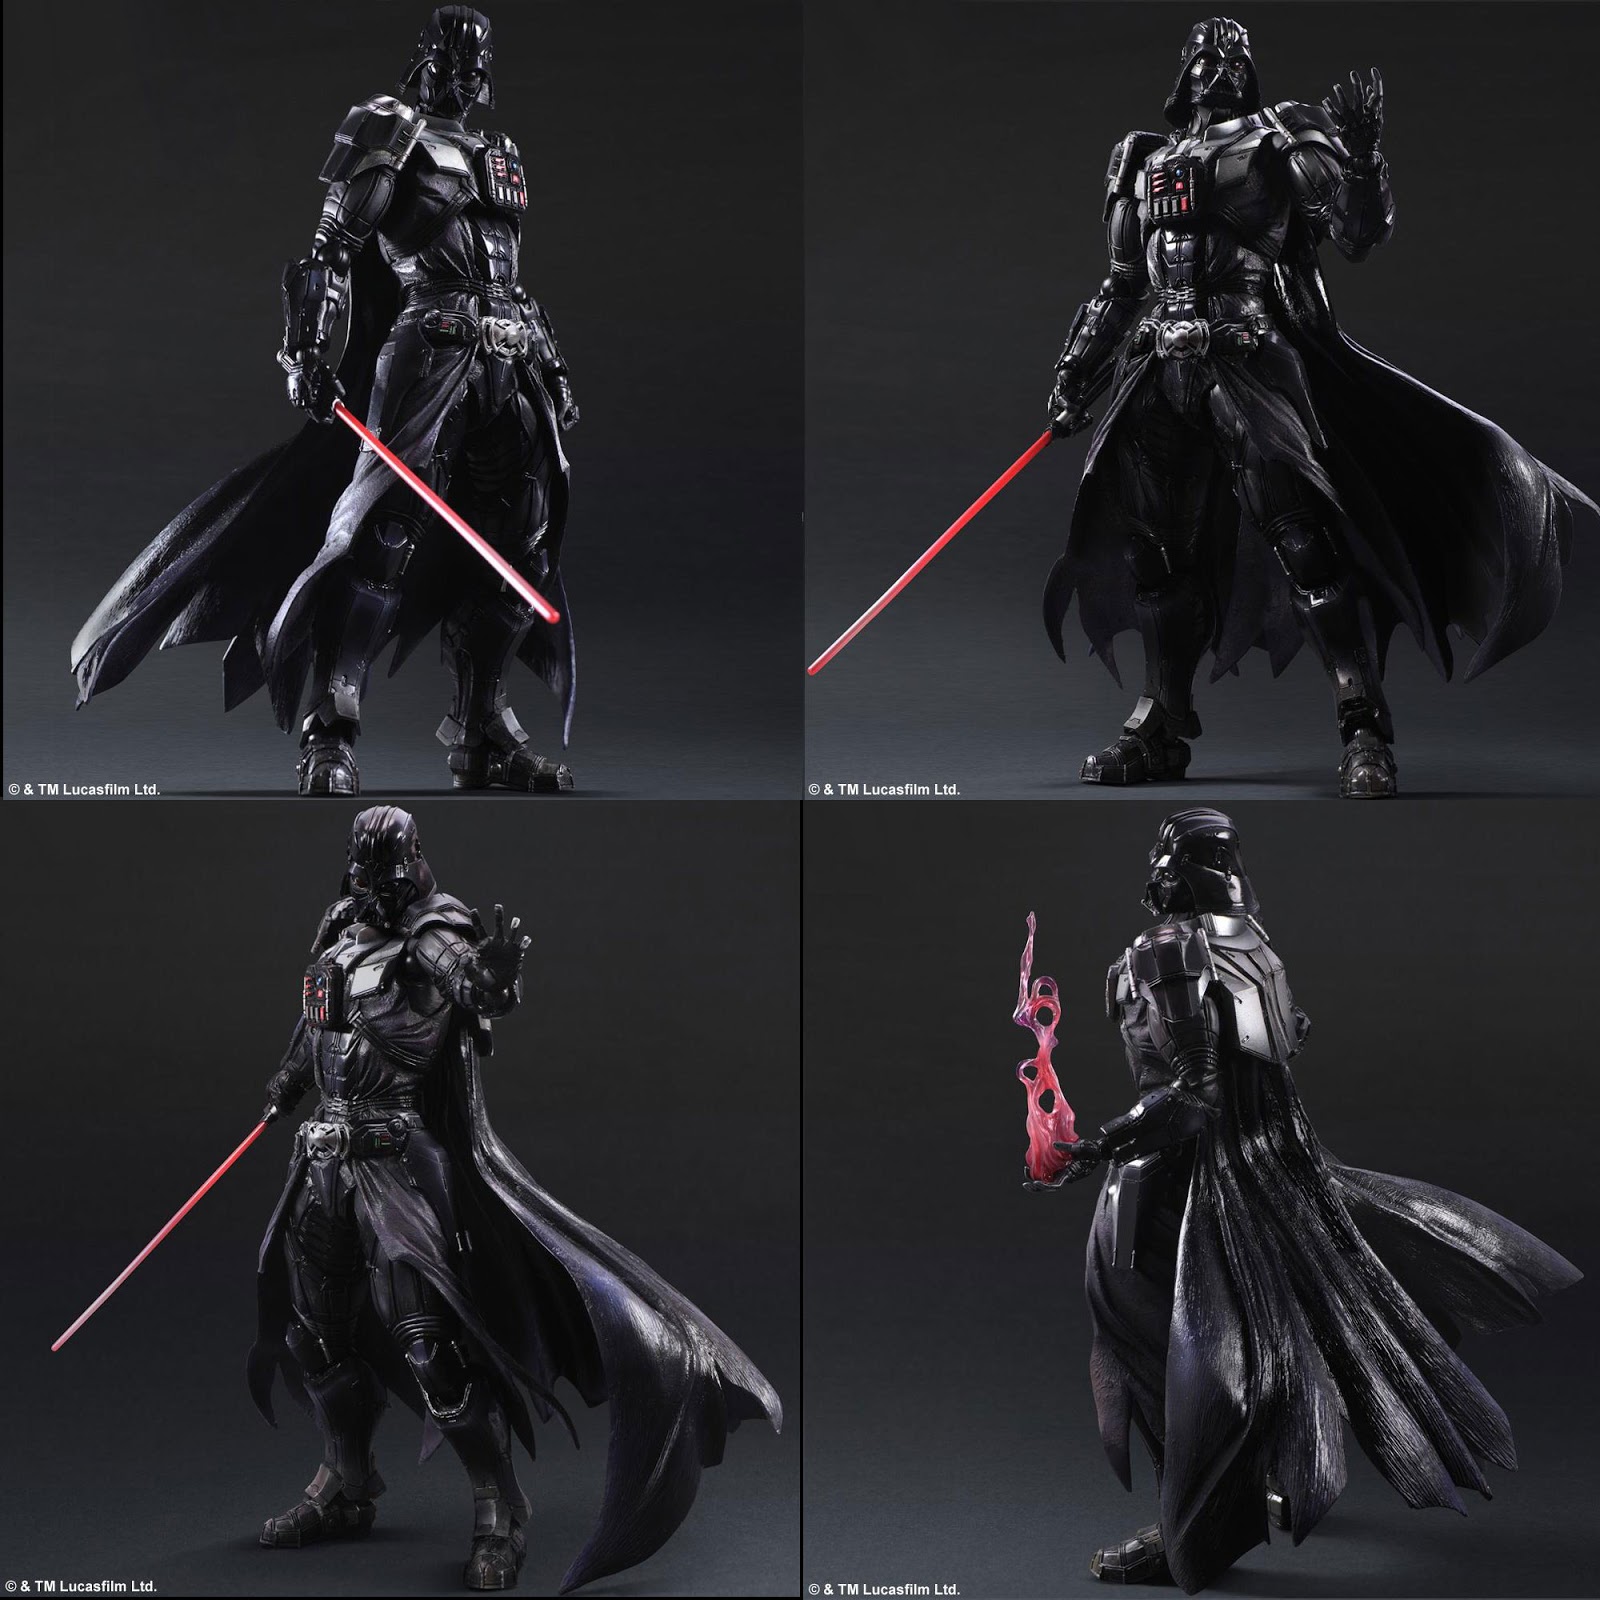 Star Wars Variant Play Arts Kai from SQUARE ENIX - VADER Star Wars Variant Play Arts Kai From SQUARE ENIX 1